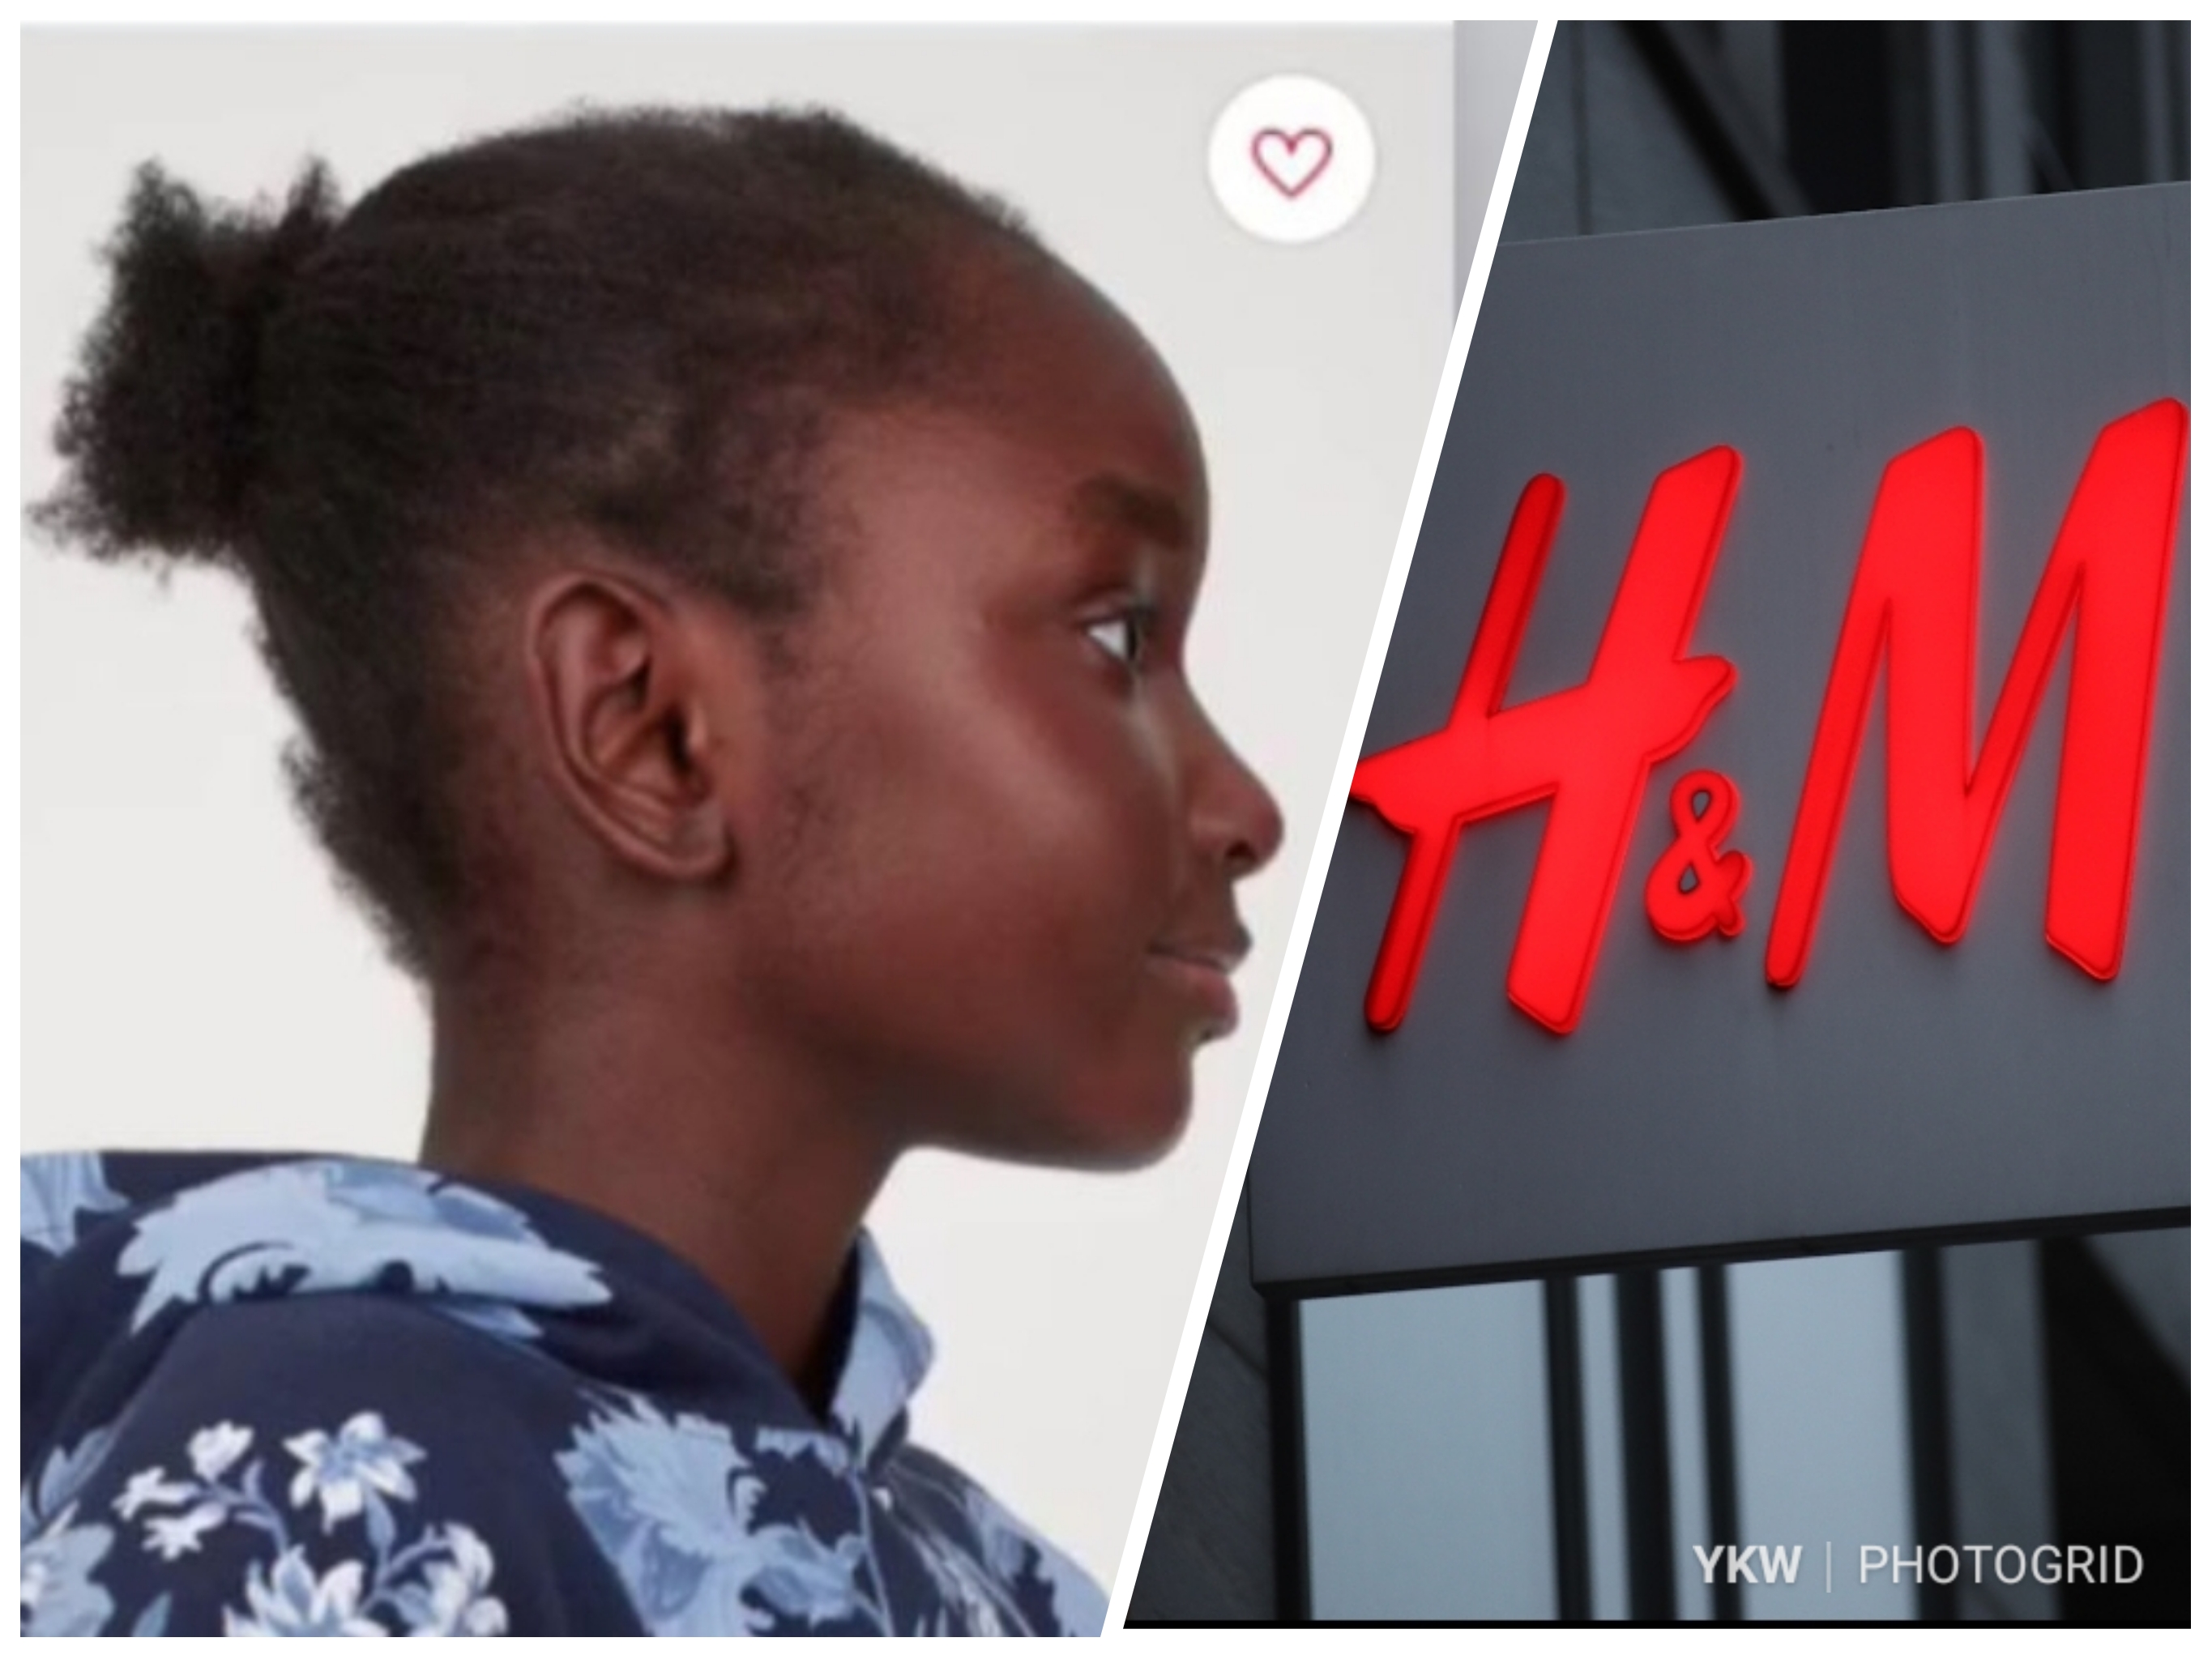 H&M Responds To Backlash Over Young Model’s Hairstyle In New Campaign